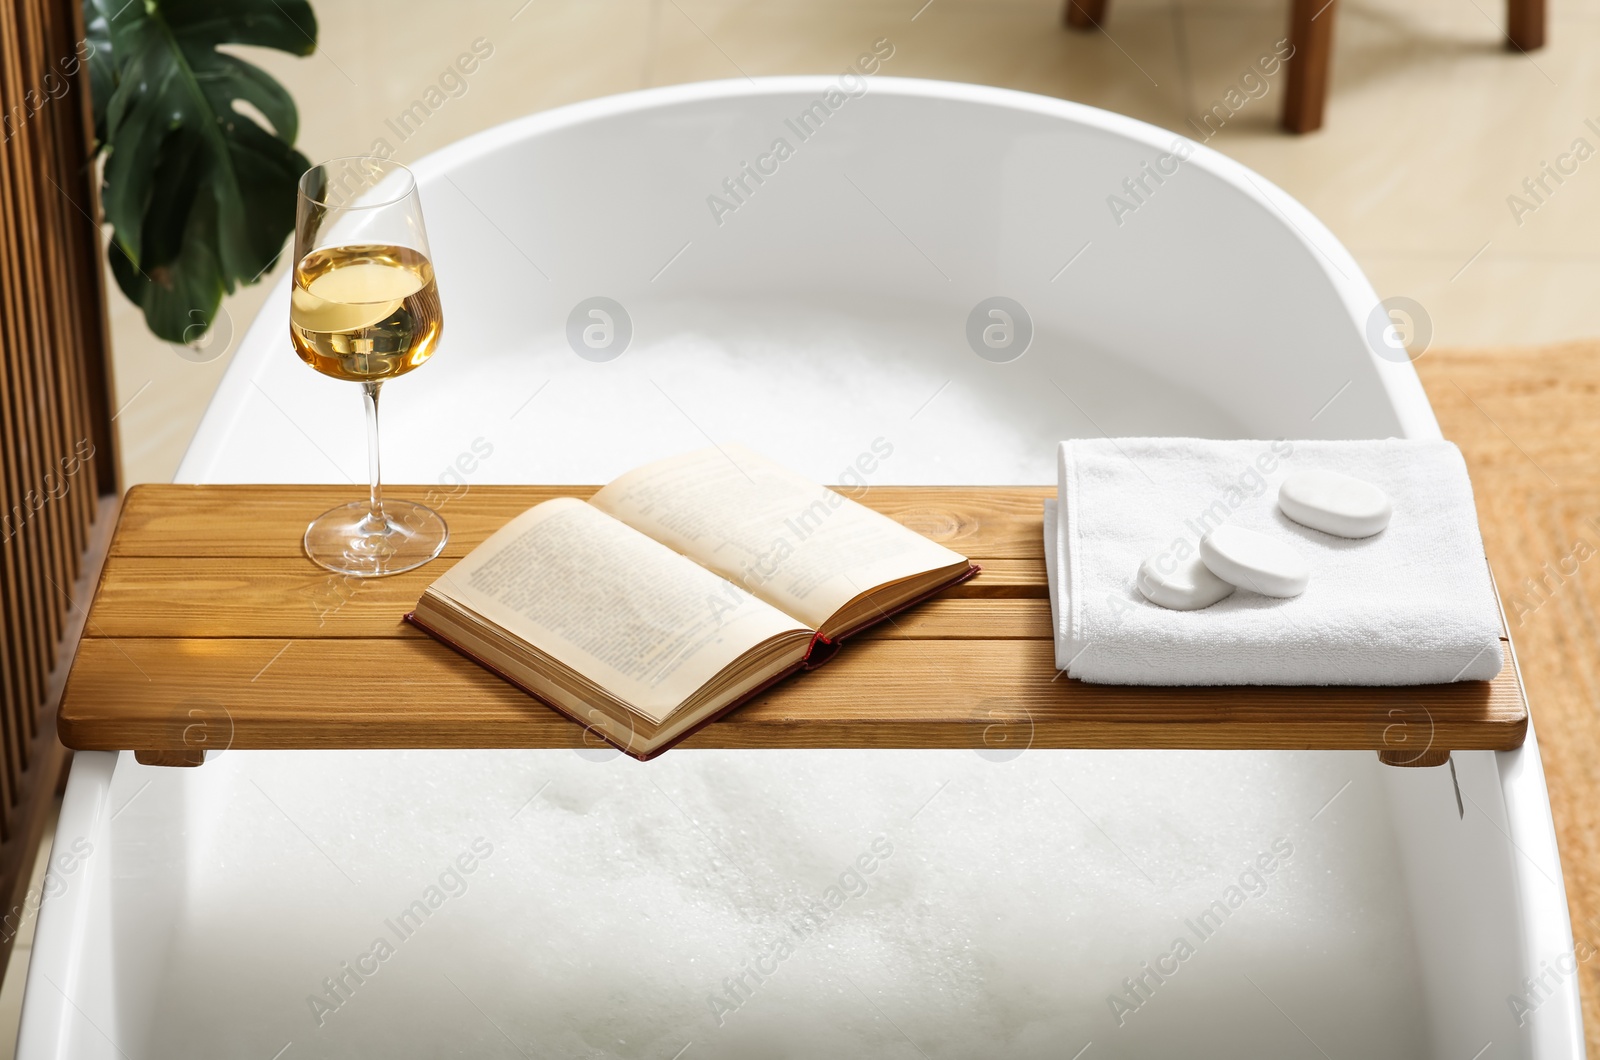 Photo of Wooden bath tray with glass of wine, open book, massage stones and towel on tub indoors. Relaxing atmosphere